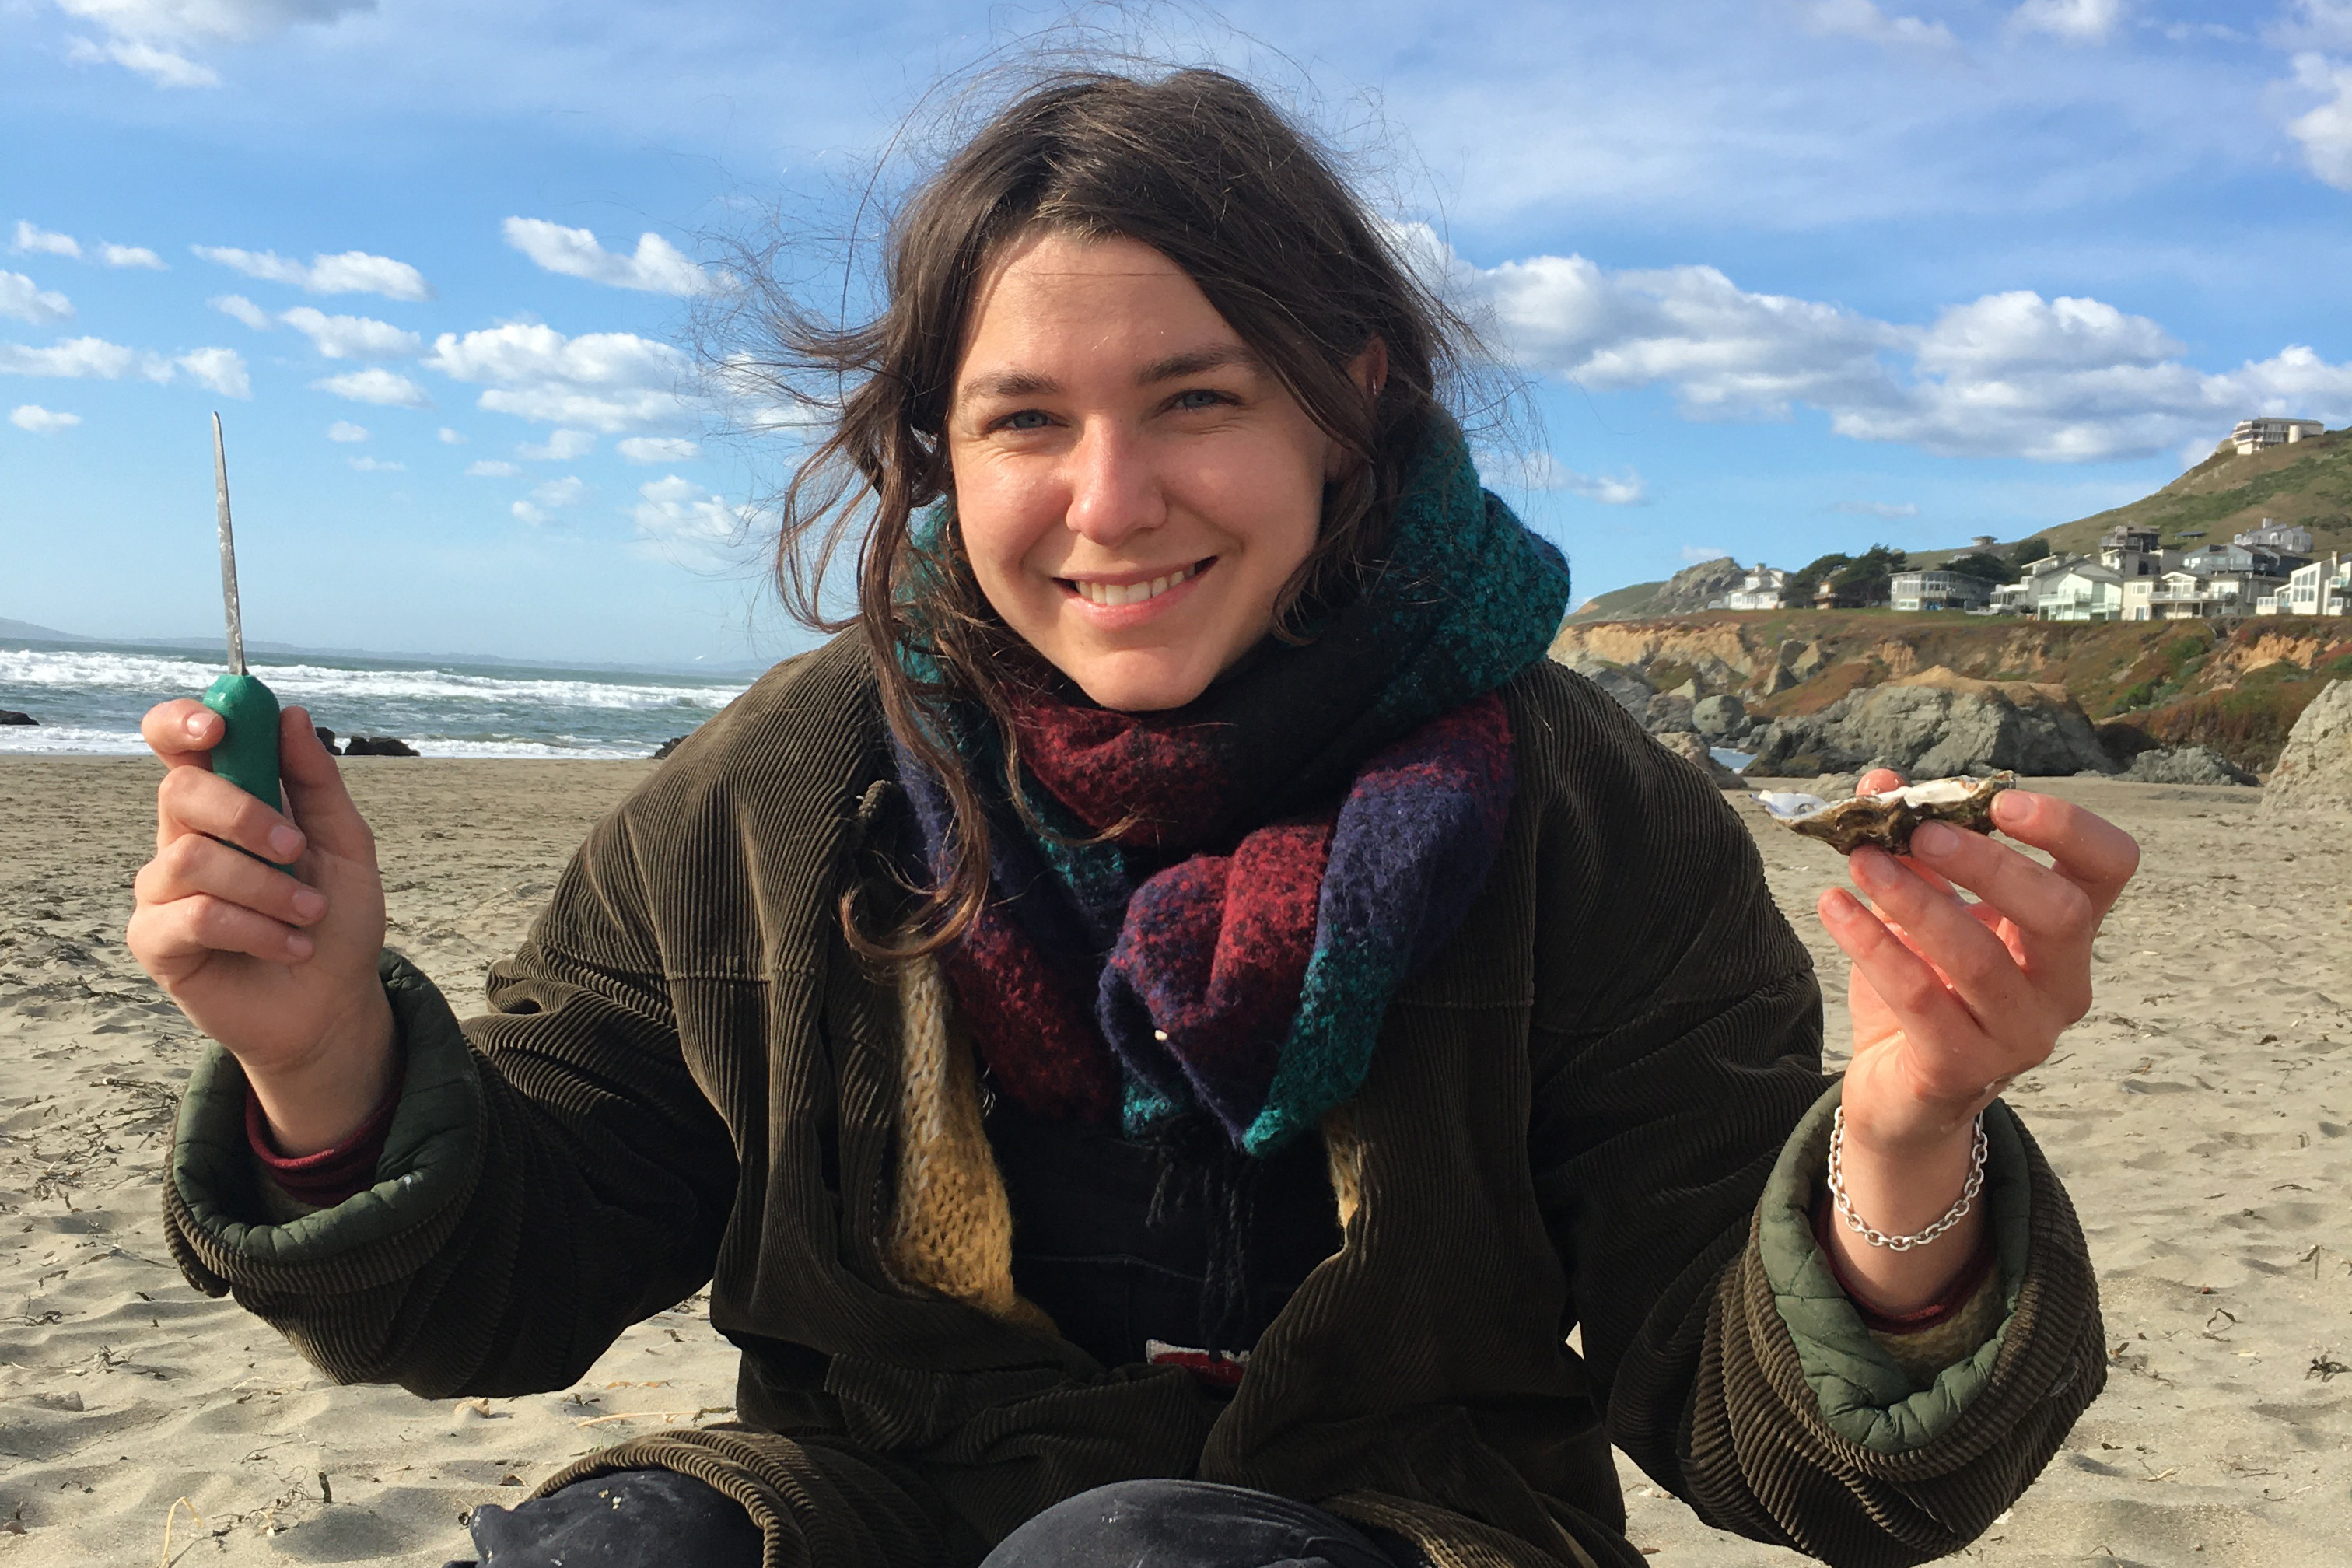 Paige Valentine sitting on a beach holding up an oyster and an oyster shucking tool.